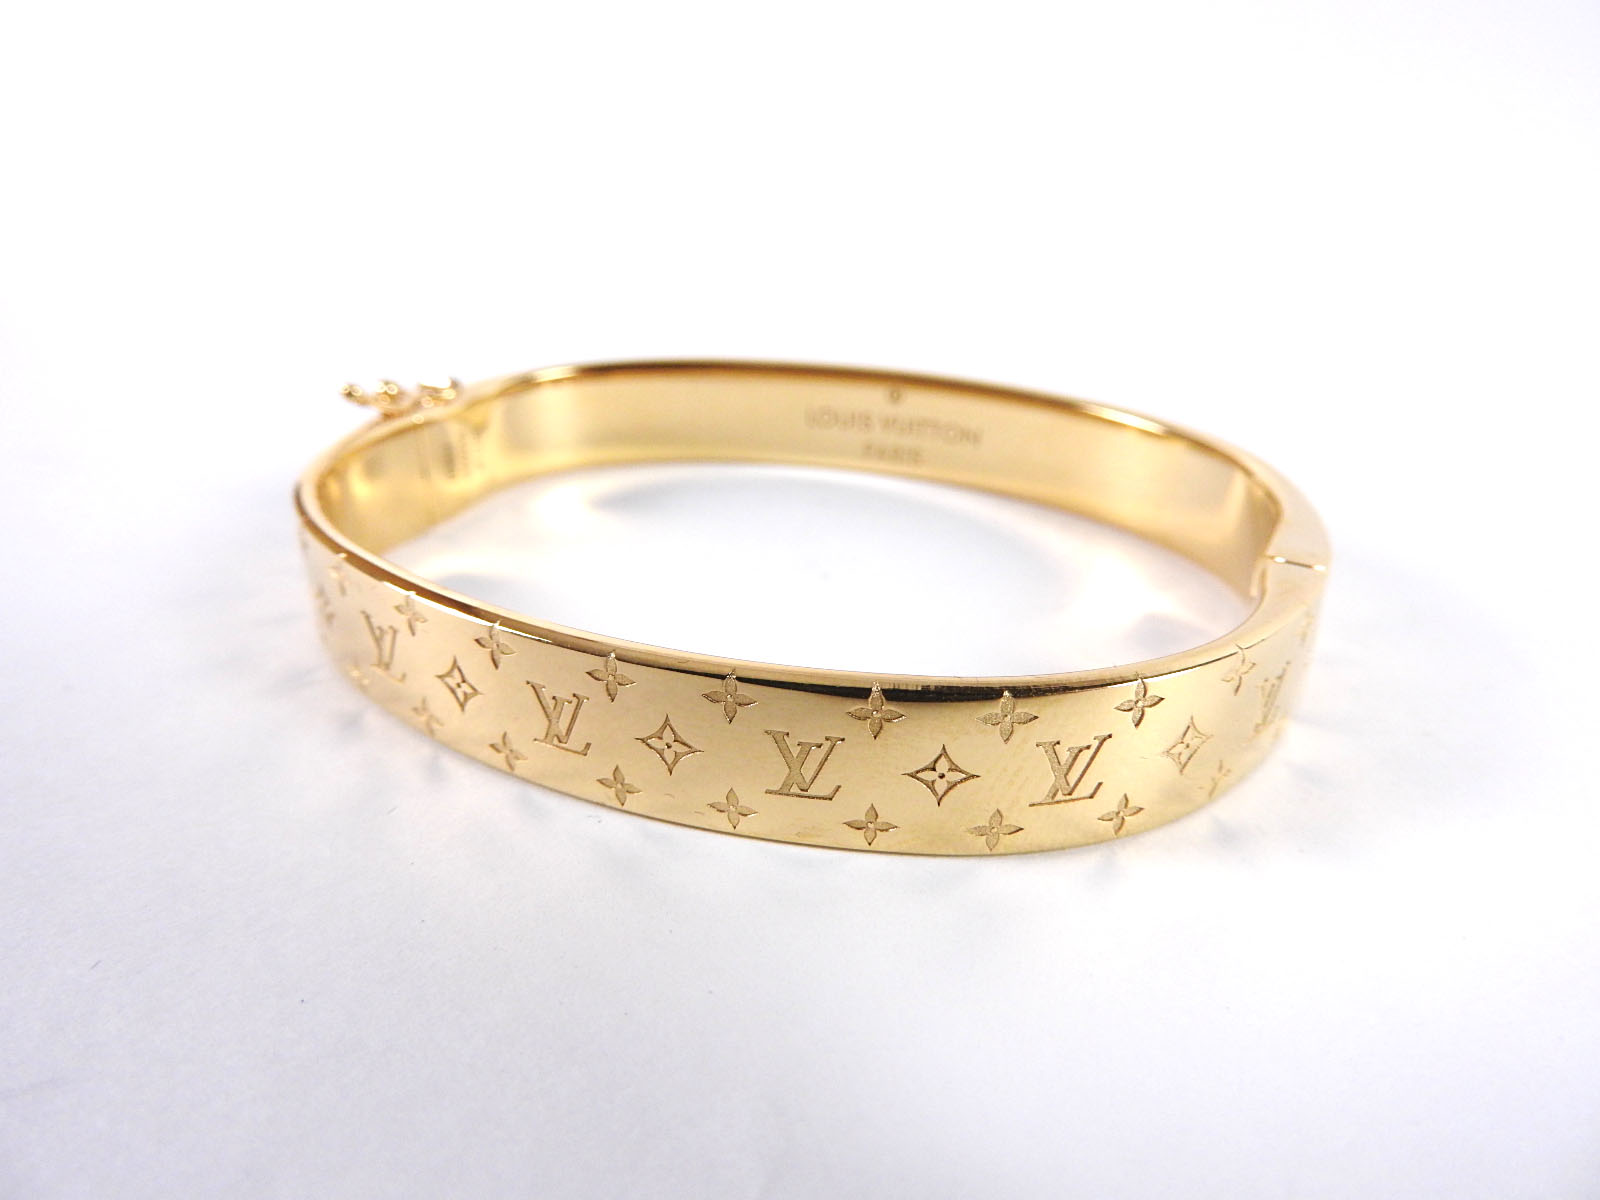 Lv Monogram Bracelet Price | Confederated Tribes of the Umatilla Indian Reservation